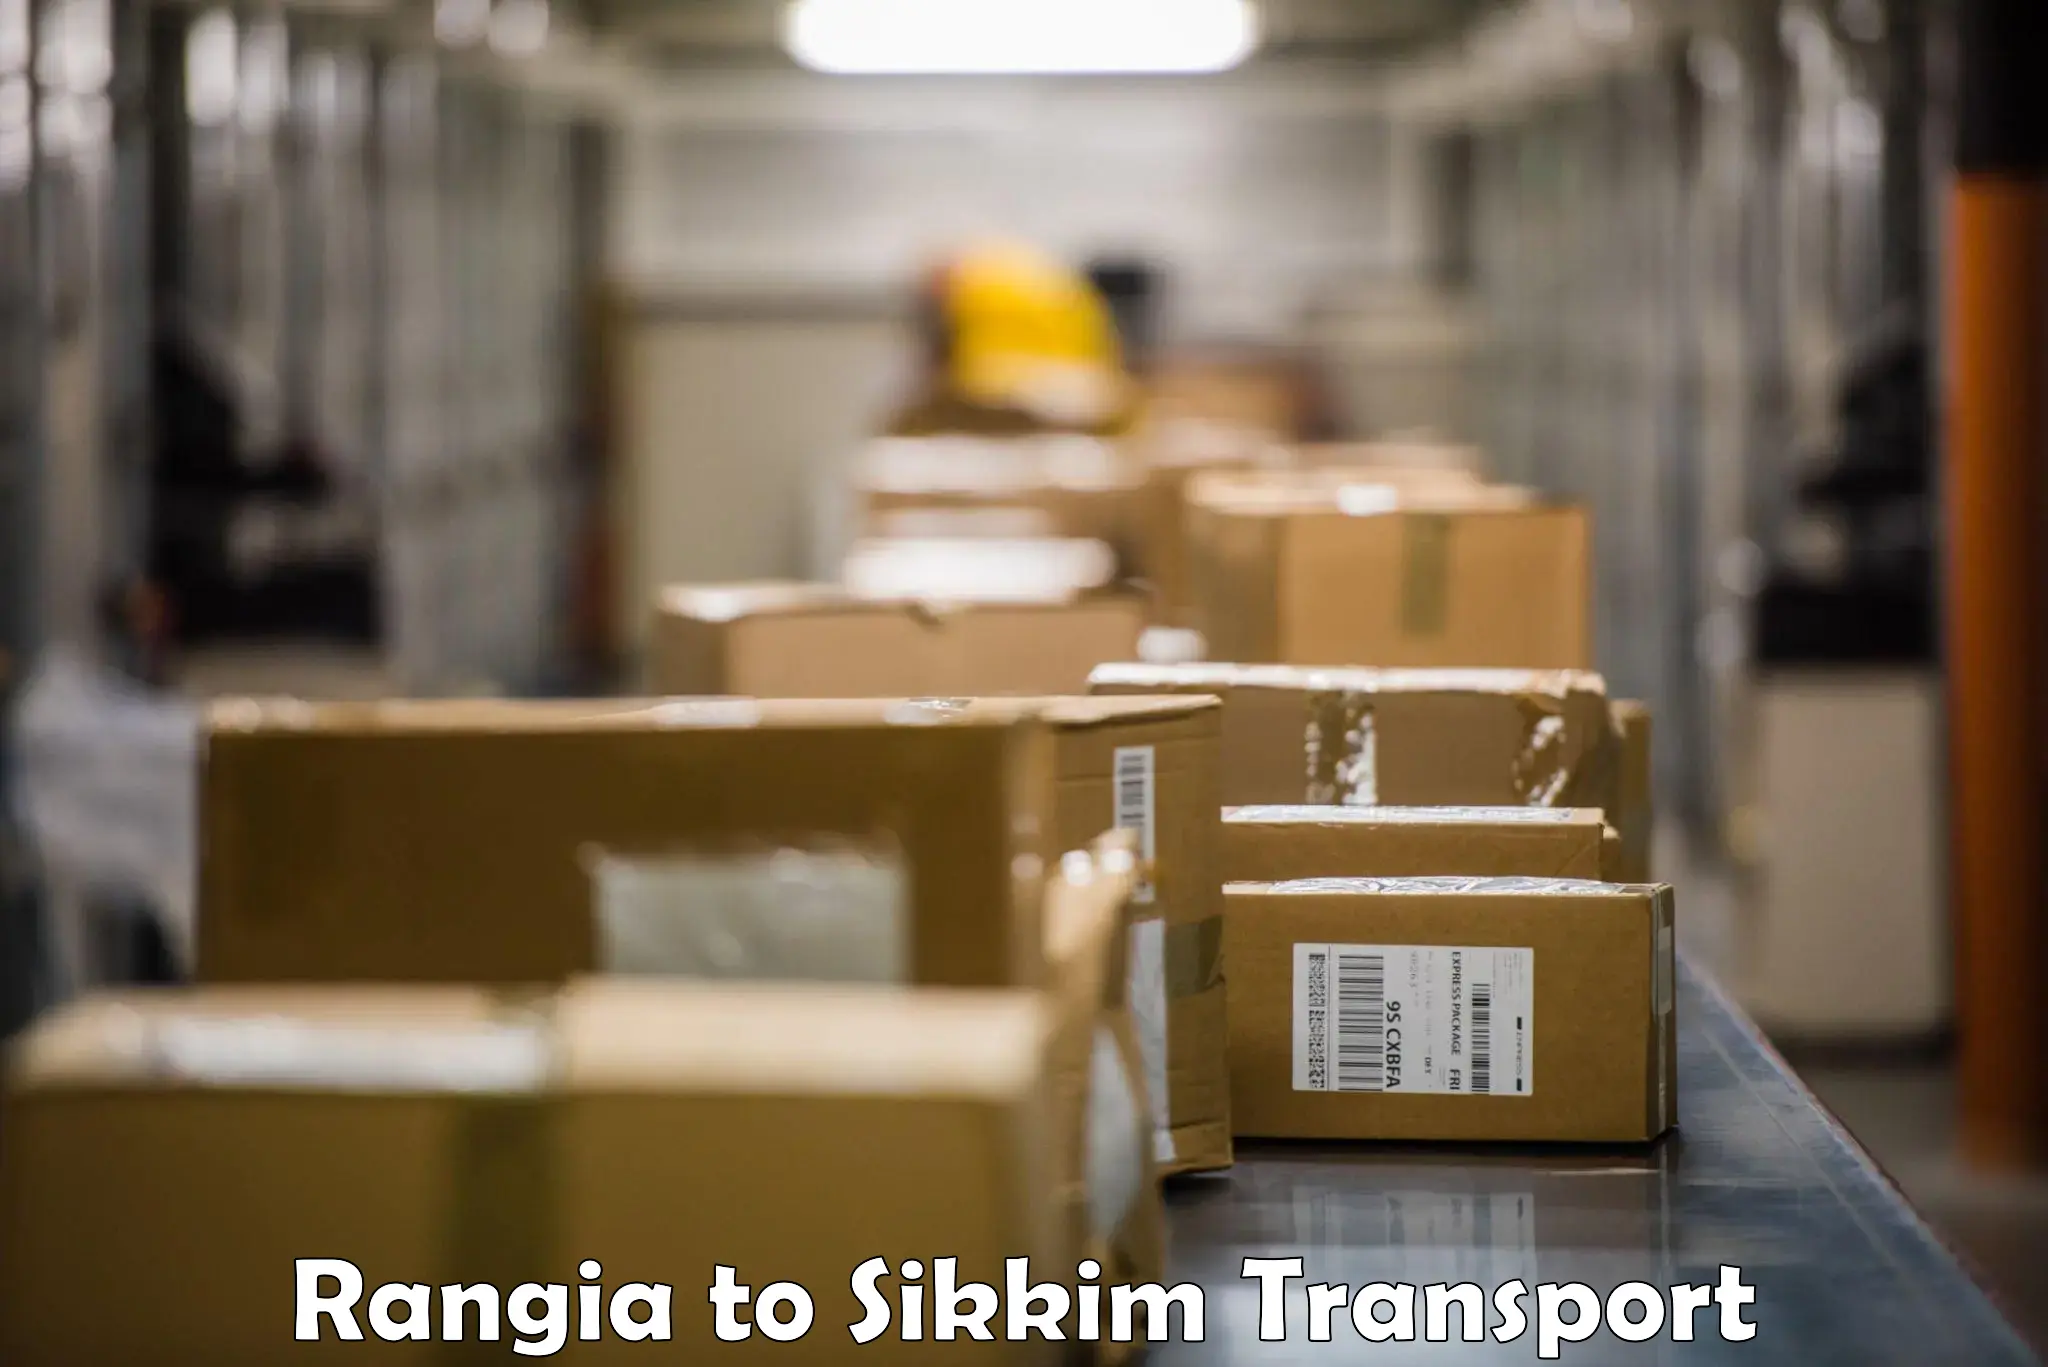 Nearby transport service Rangia to Sikkim